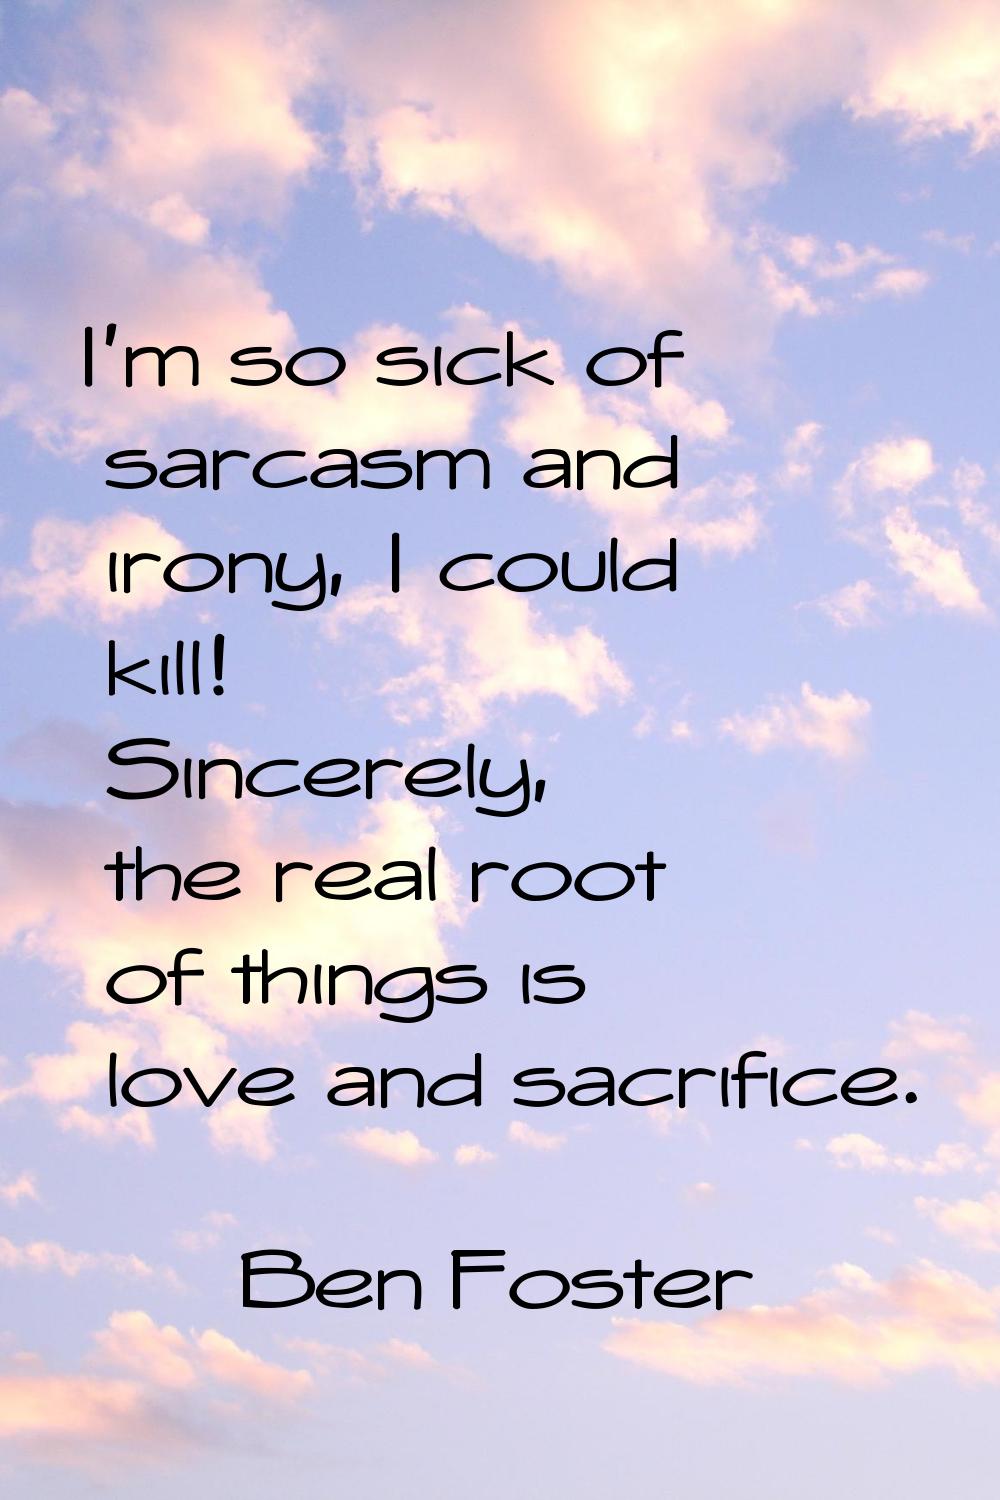 I'm so sick of sarcasm and irony, I could kill! Sincerely, the real root of things is love and sacr